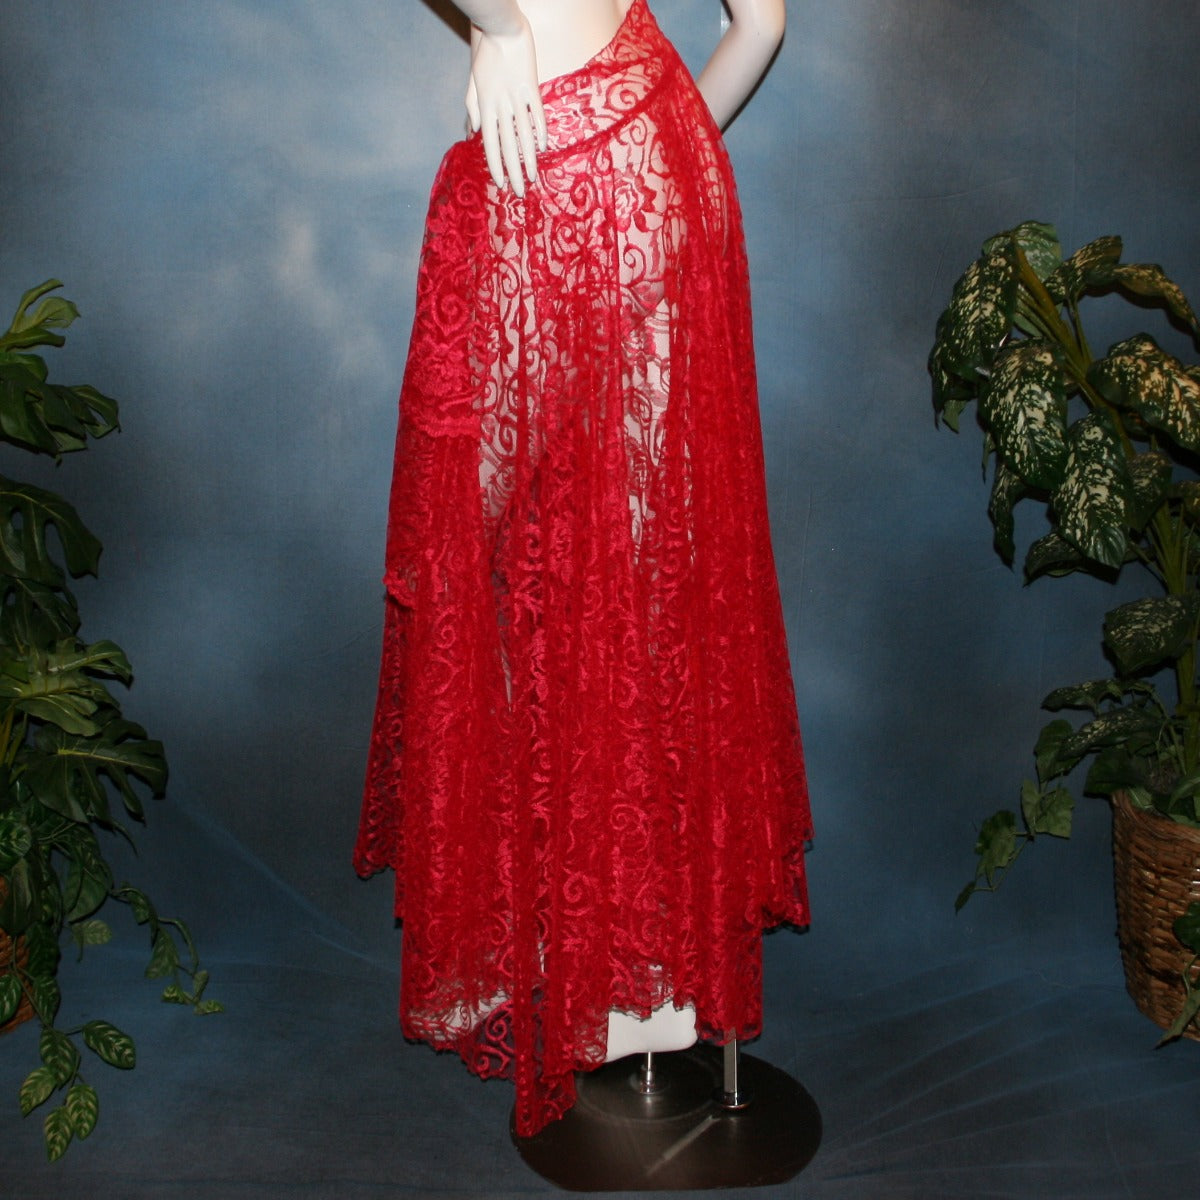 Crystal's Creations side view of Red lace ballroom skirt, wrap style, was created with yards of red lace, many panels shaped like large petals.